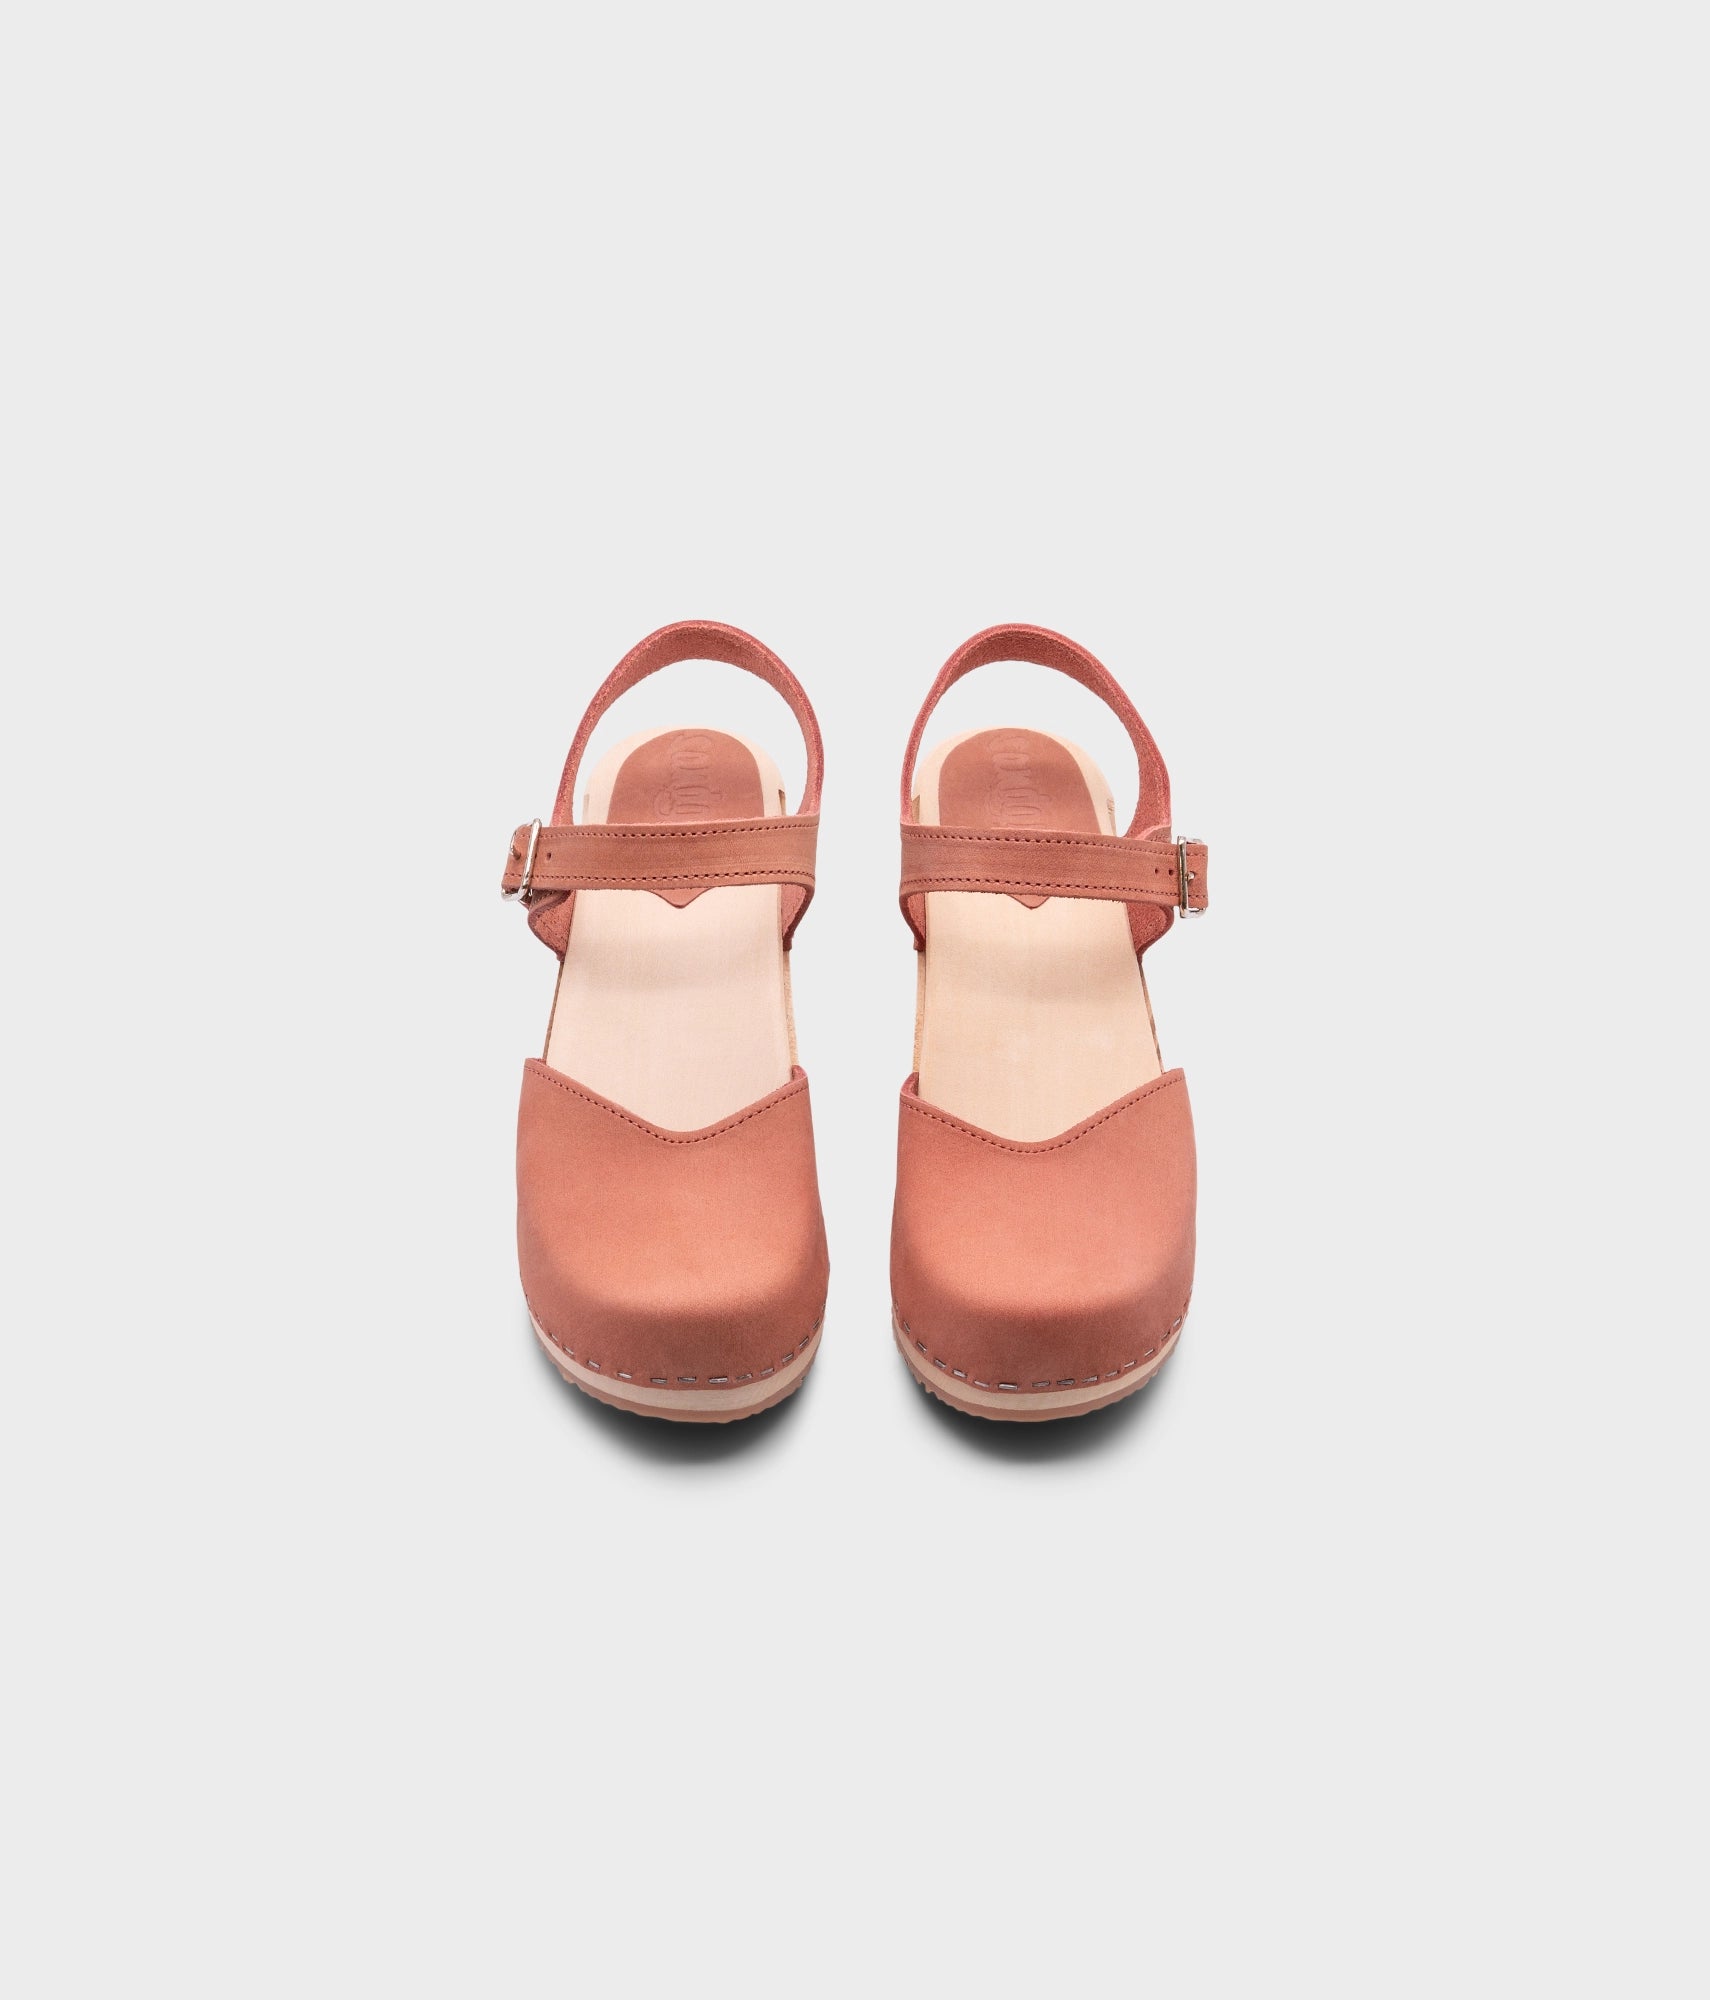 high heeled closed-toe clog sandal in blush pink nubuck leather stapled on a light wooden base